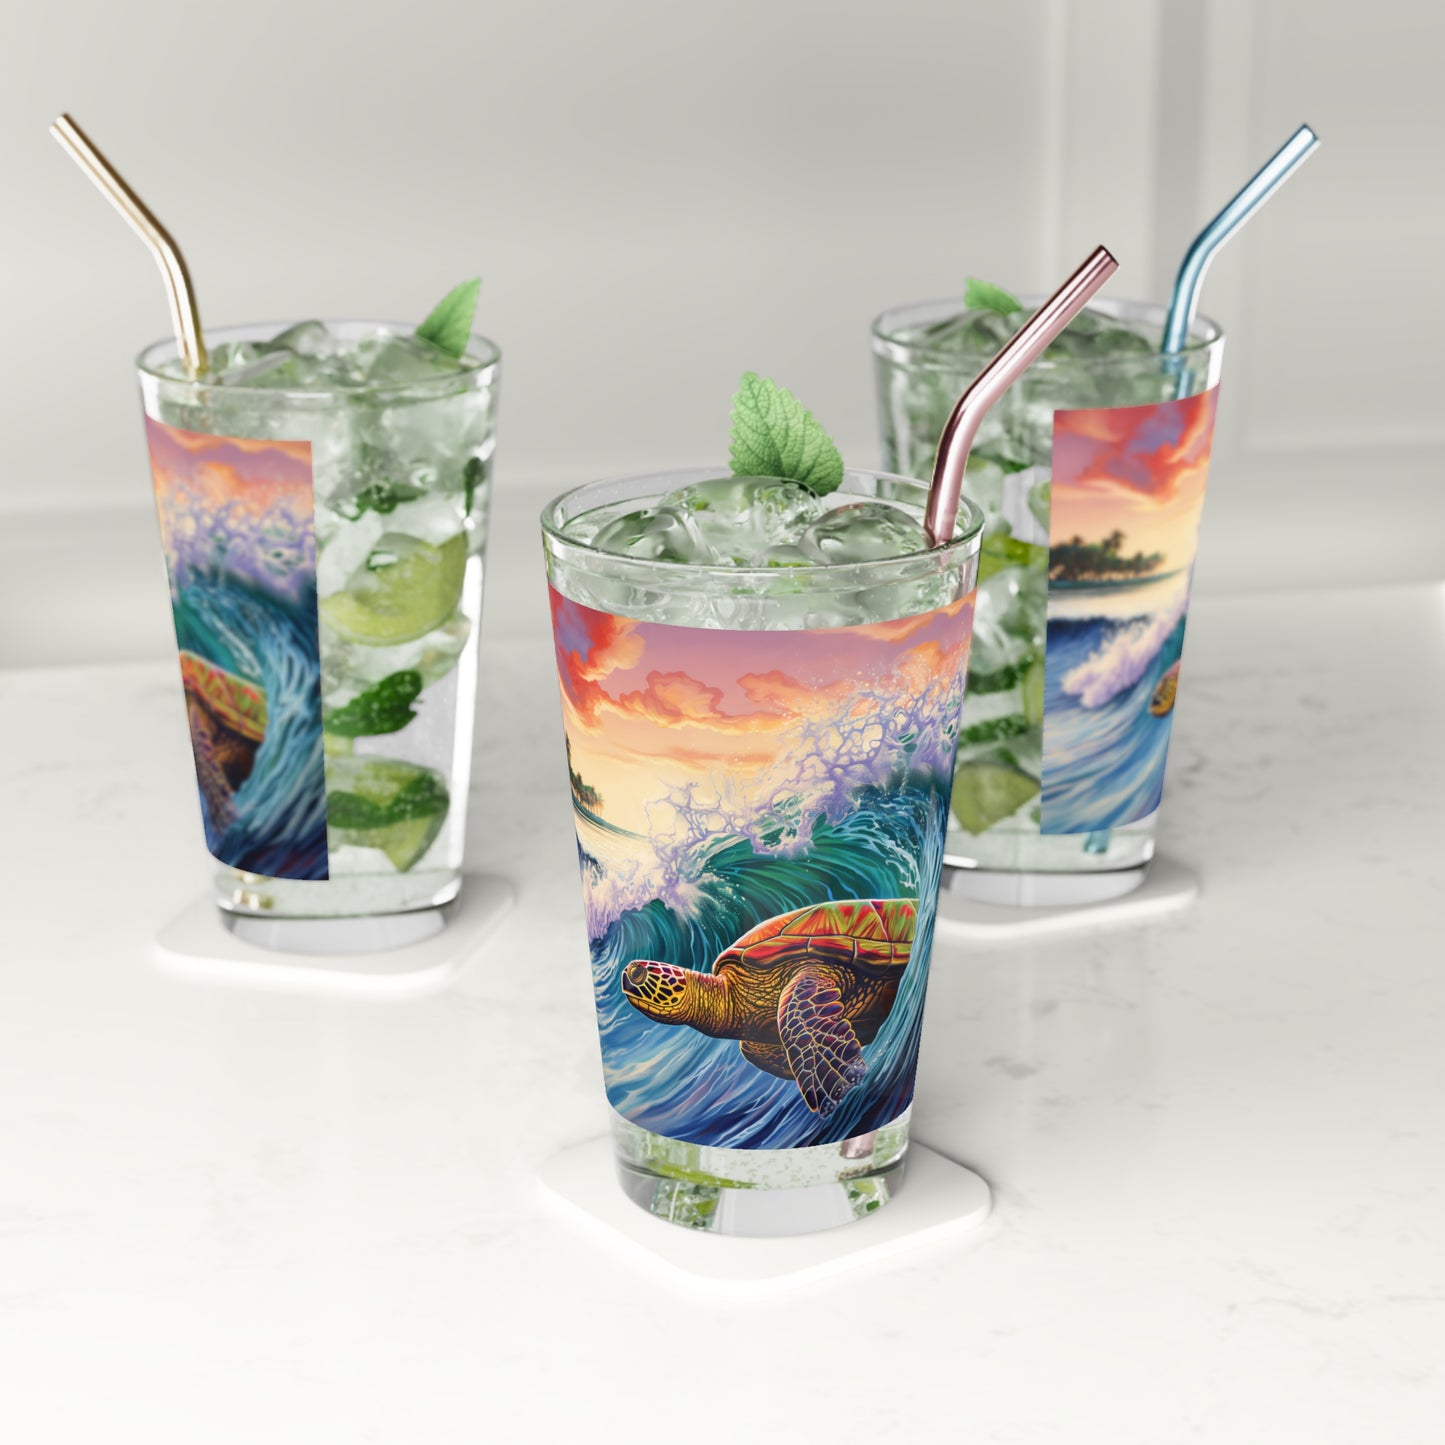 Immerse yourself in the charm of Hawaiian waves with our Turtle Surfing Waves Pint Glass. Waves Design #009 adorns this 16oz glass, a masterpiece by Stashbox, bringing the beauty of the ocean to your fingertips.